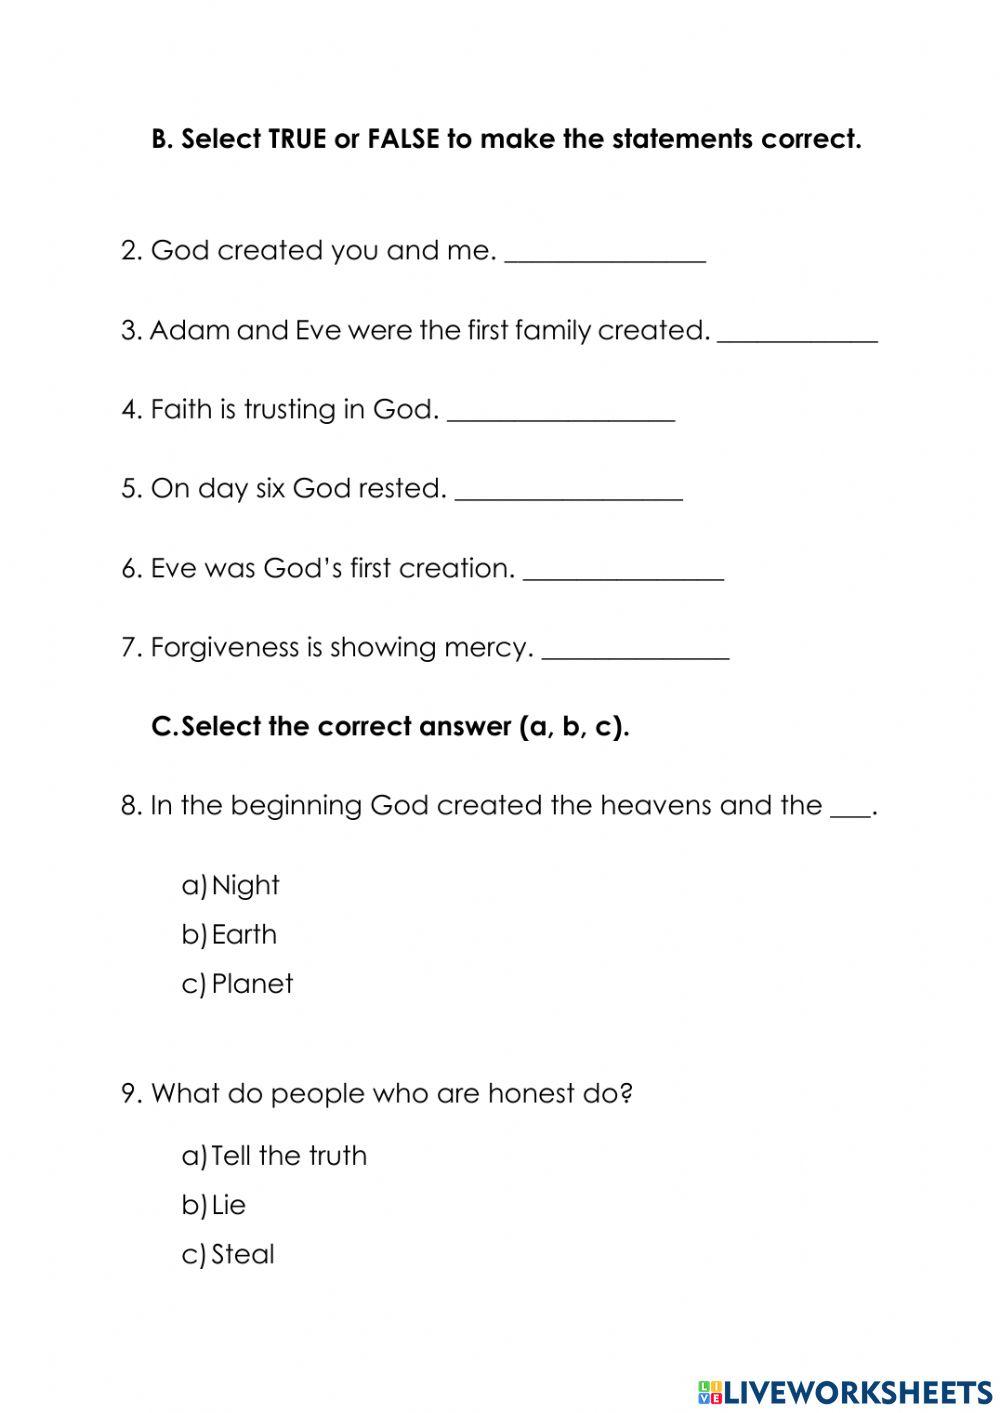 Moral and Religious Education test